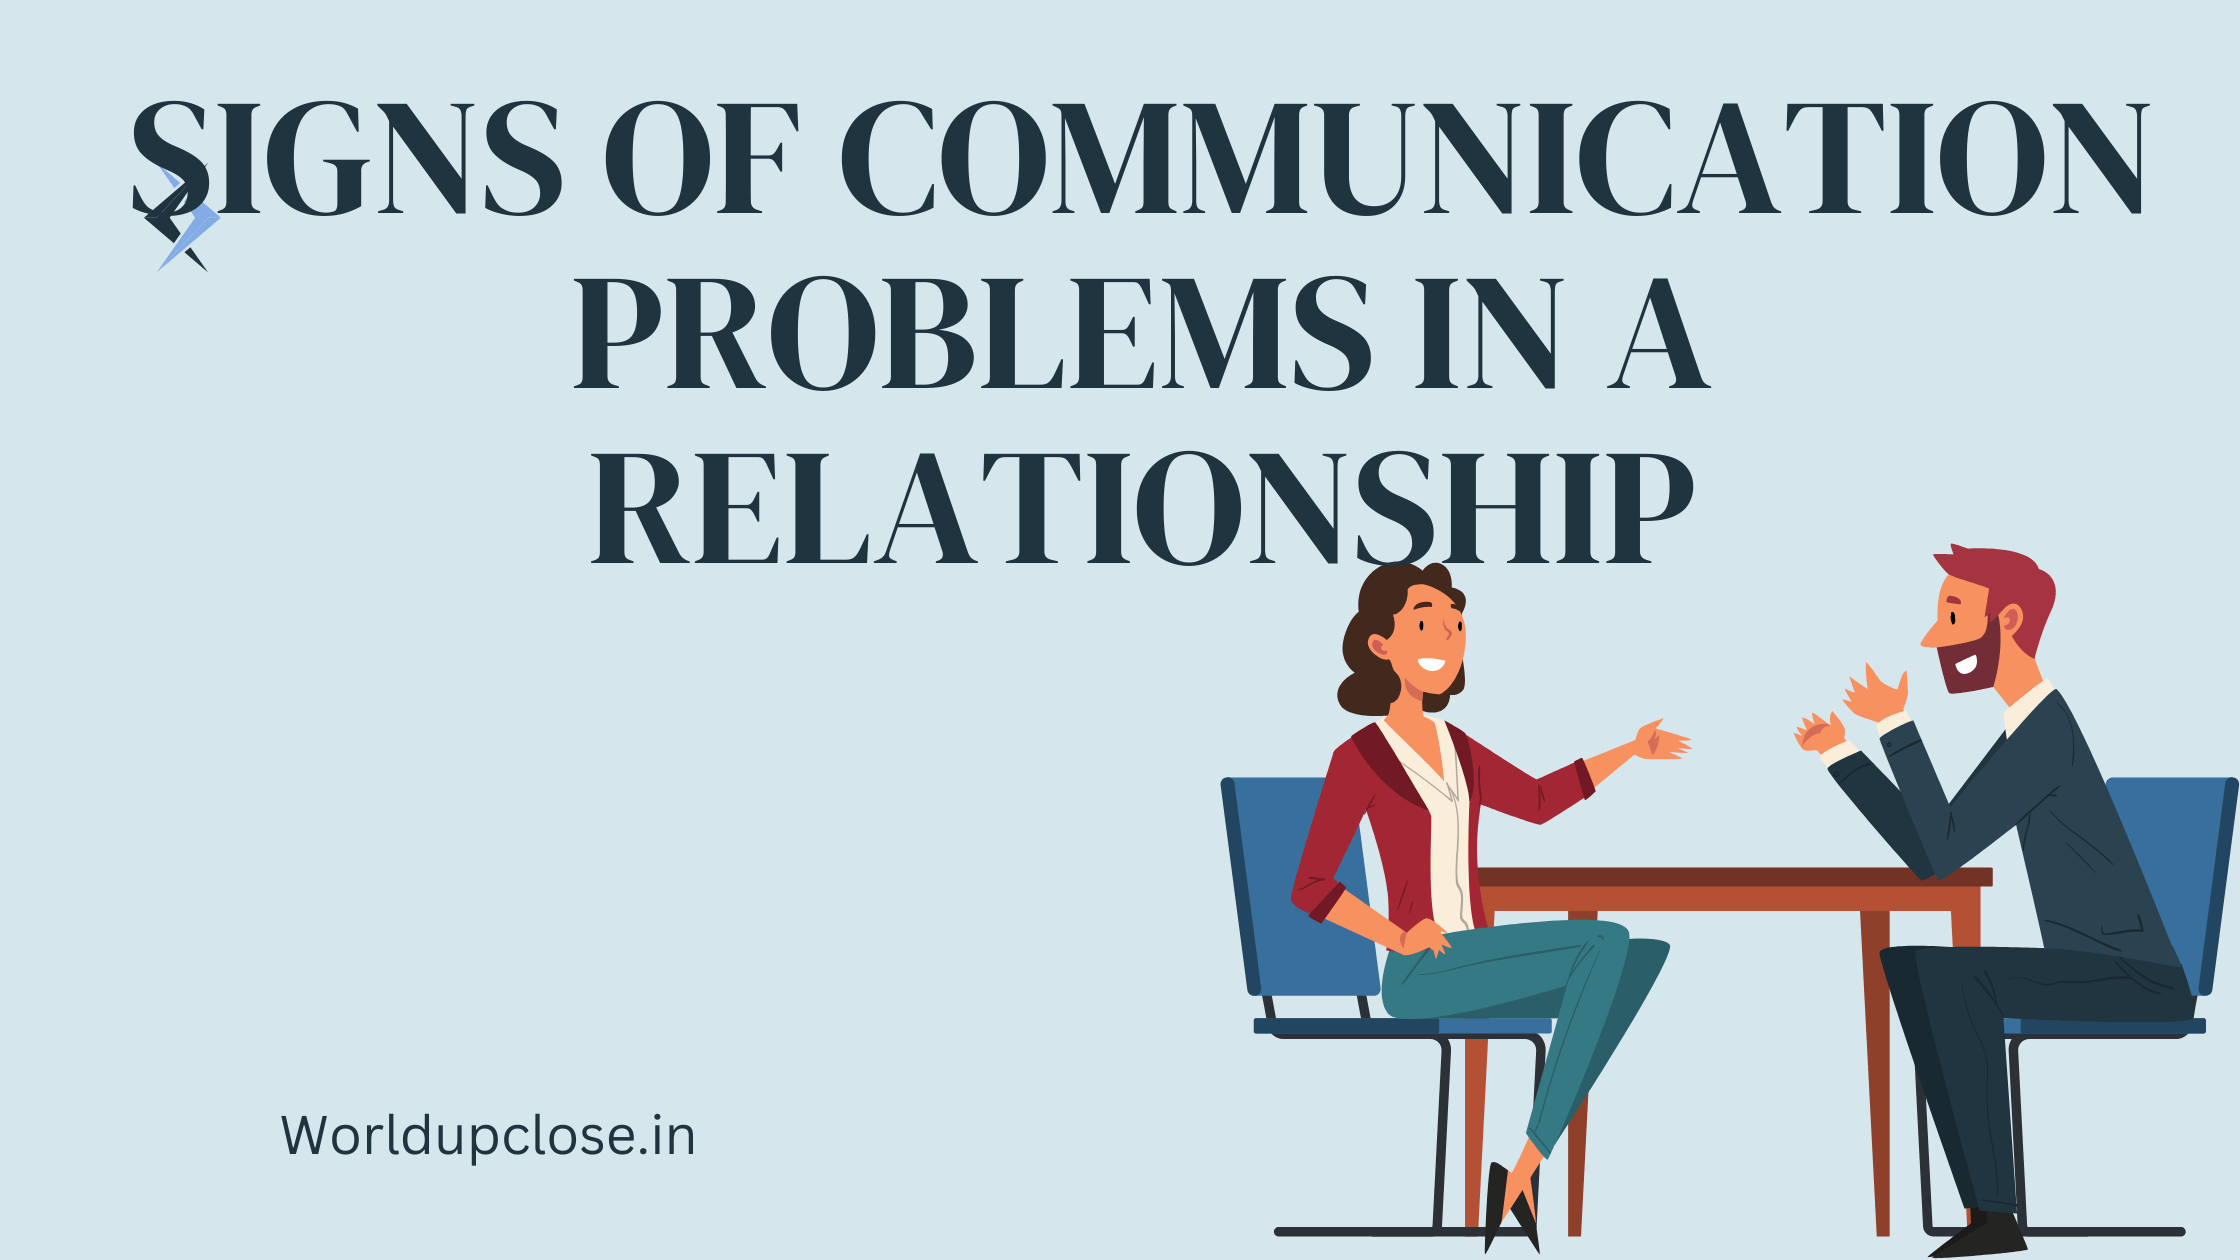 15 Signs of communication problems in a relationship 2